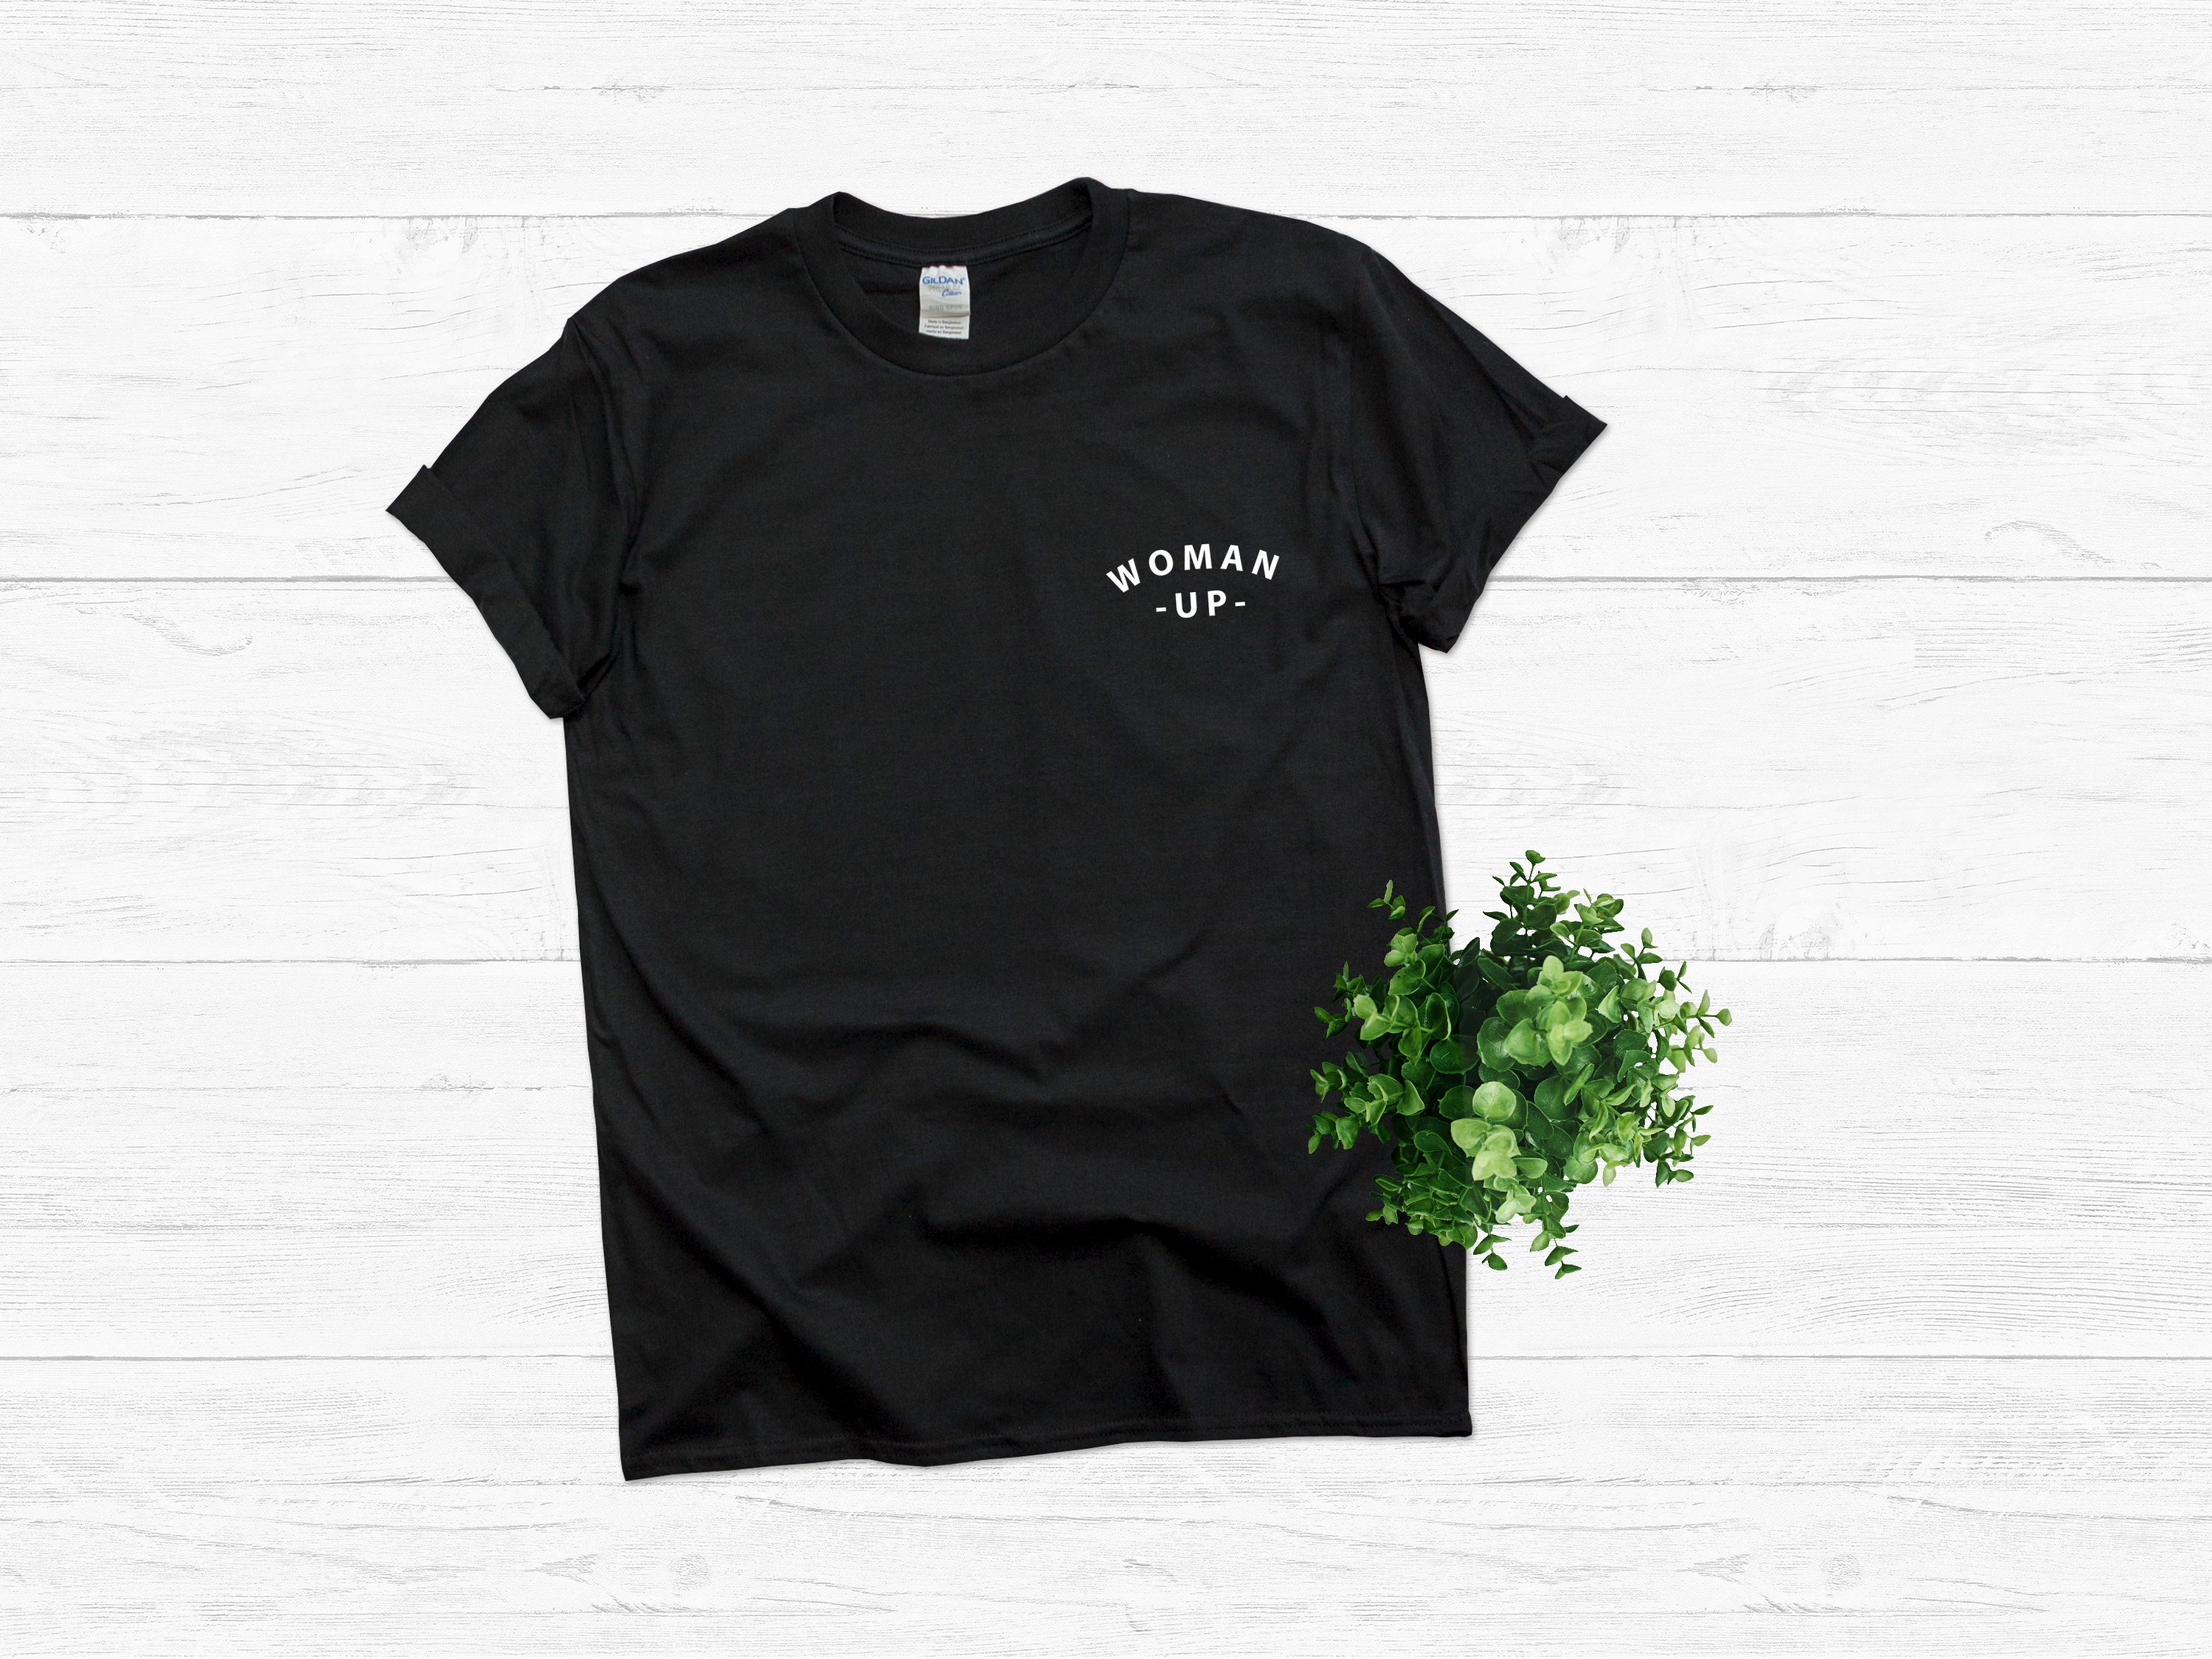 Discover Woman Up, Woman Up Pocket Size Shirt, Woman Up Pocket Size T Shirt, Feminist Shirt, Perfect gift.